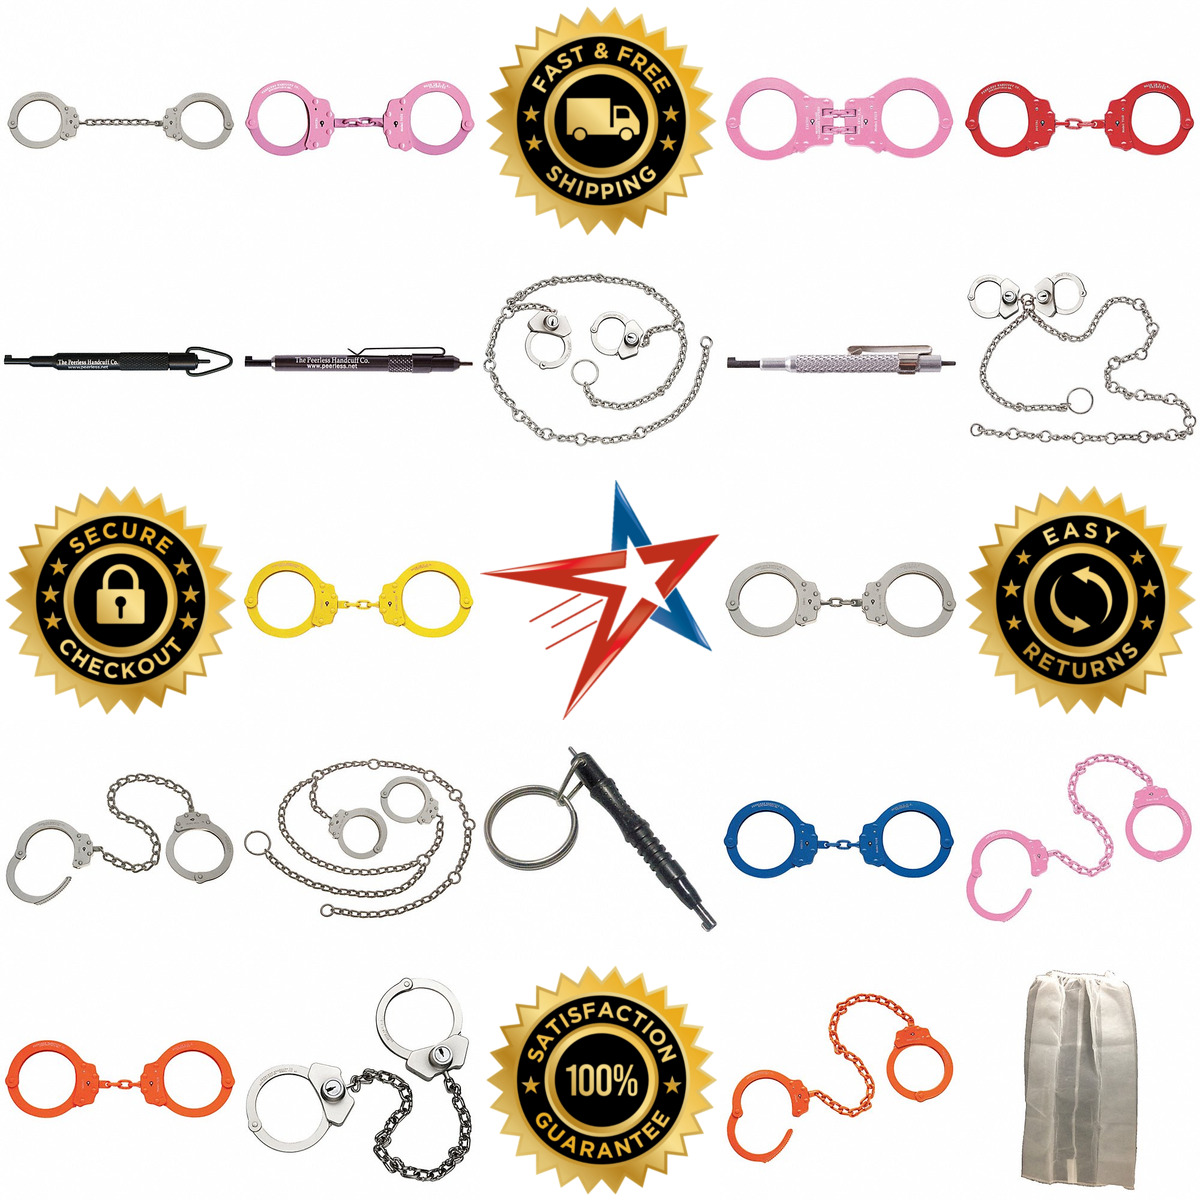 A selection of Handcuffs and Restraints products on GoVets